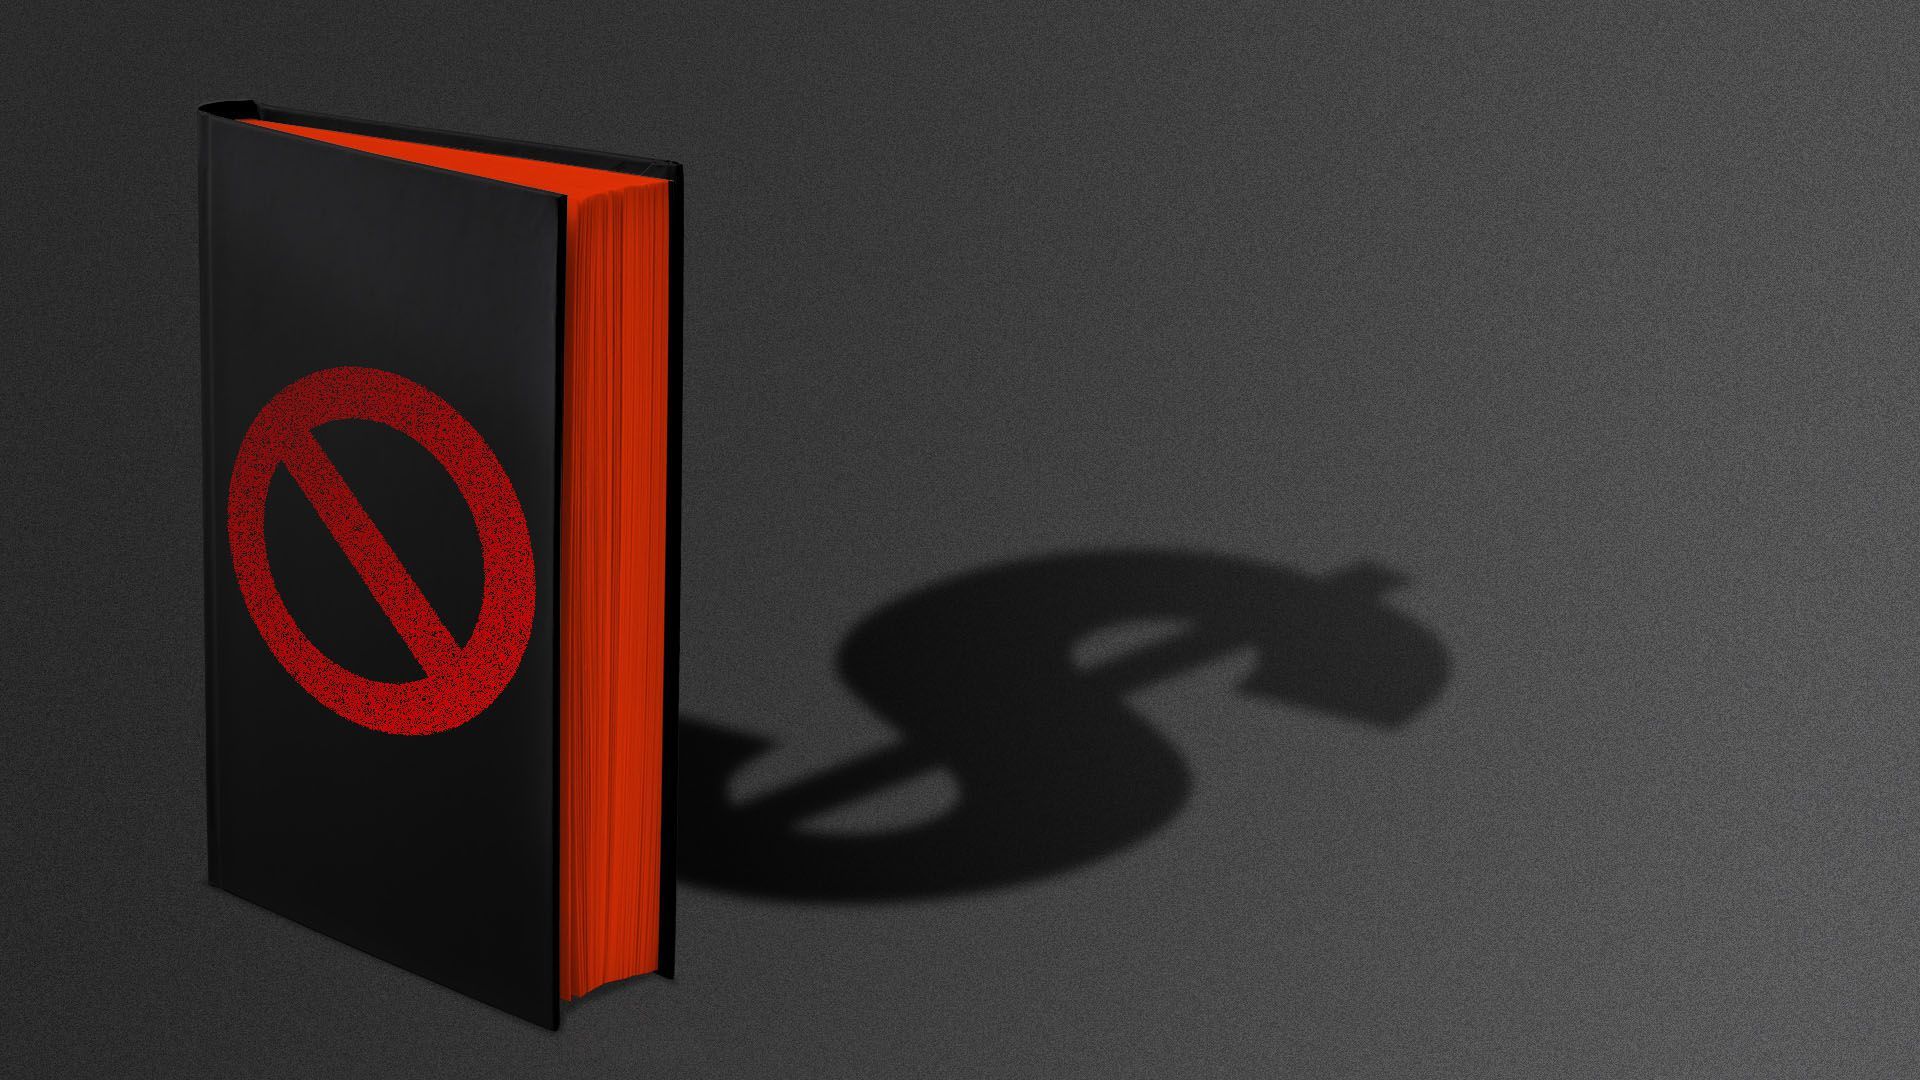 Illustration of a book with a "no" symbol on the covering casting a dollar-sign shadow.